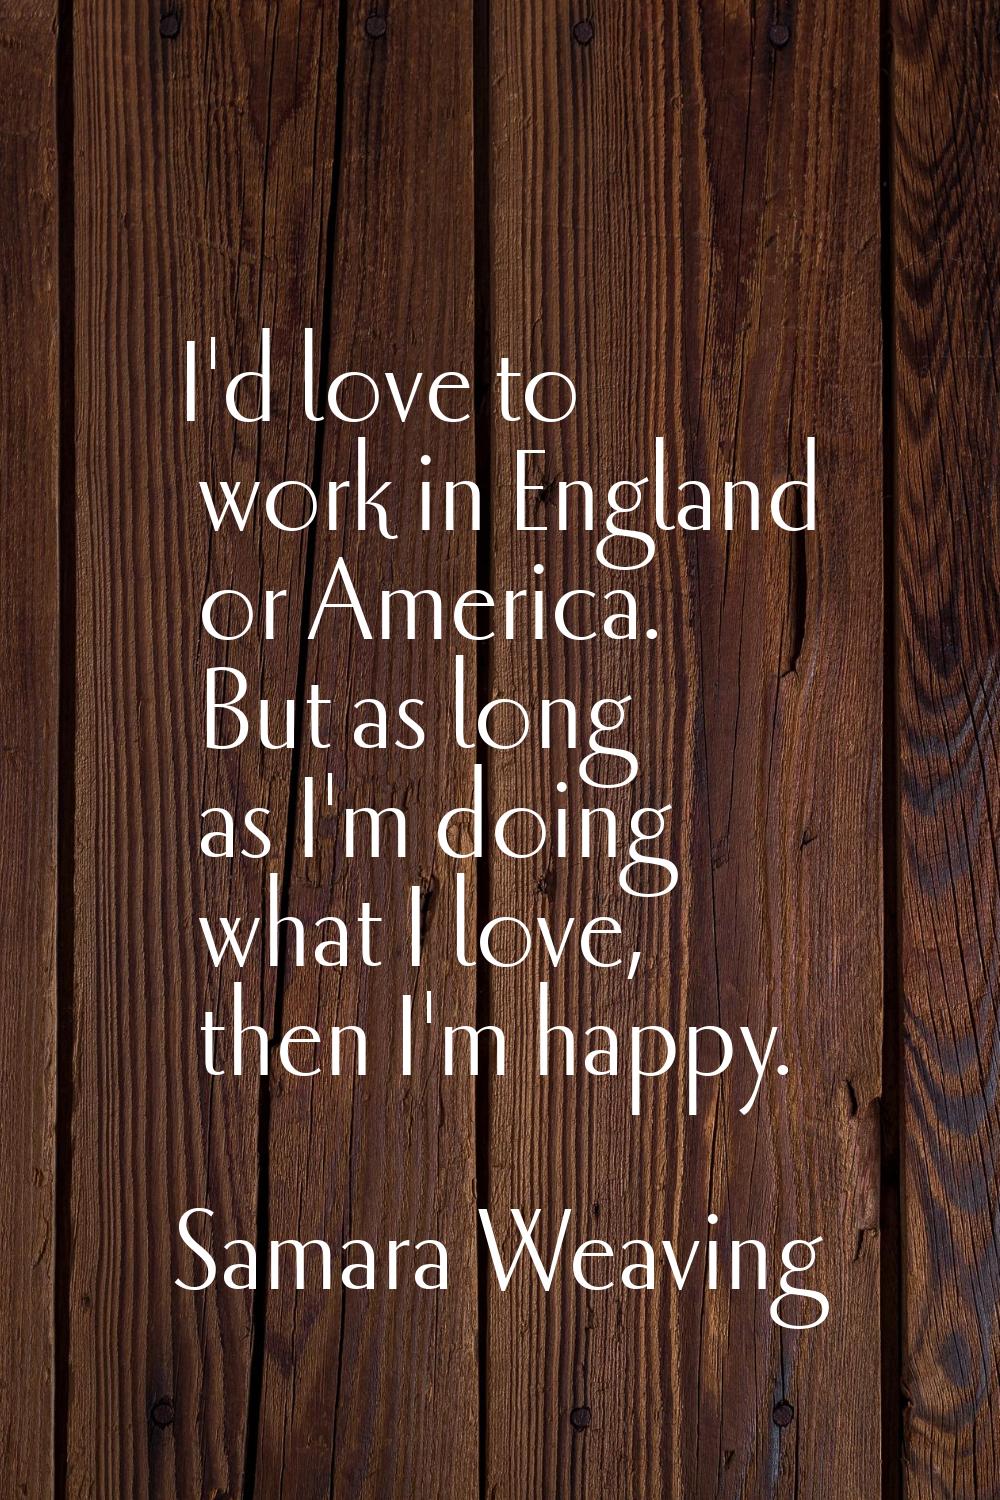 I'd love to work in England or America. But as long as I'm doing what I love, then I'm happy.